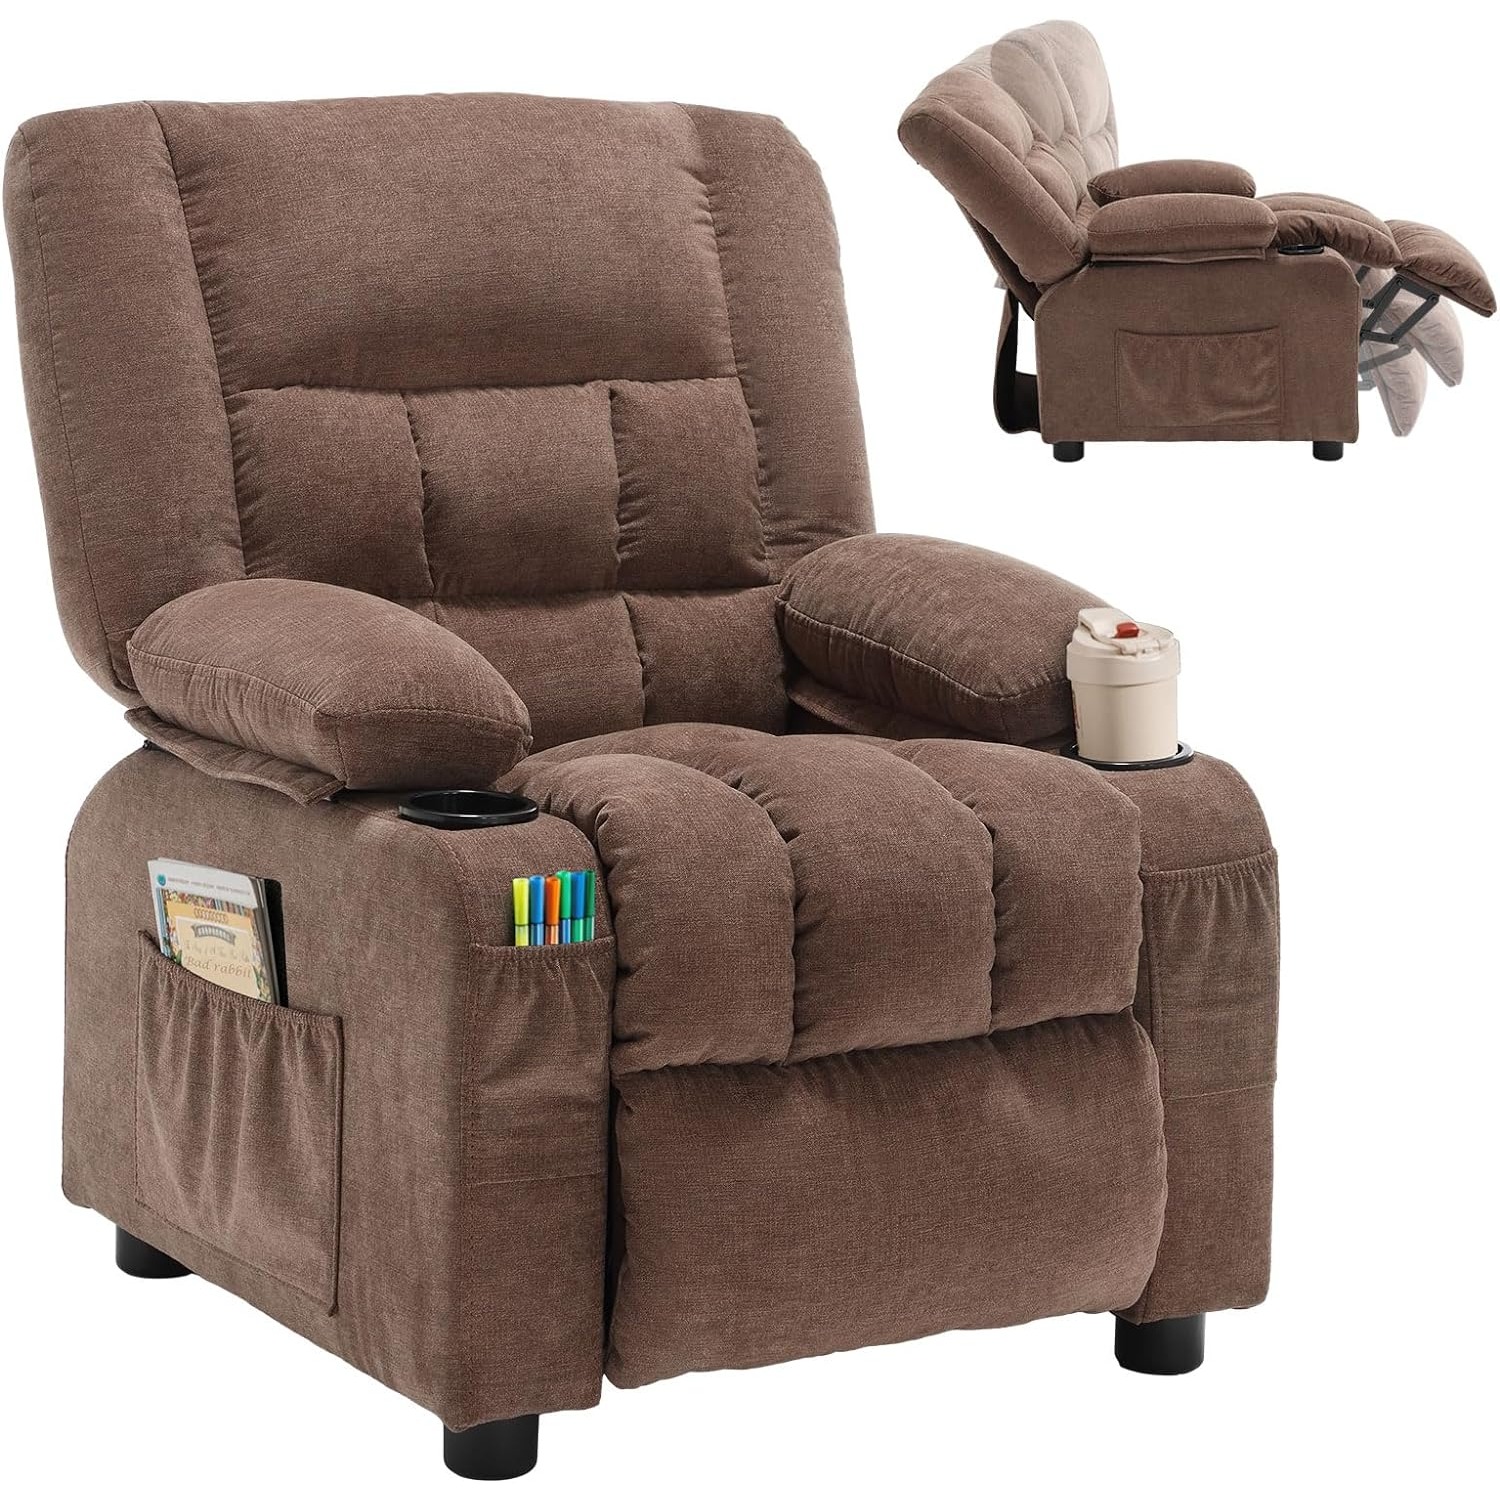 

Kids Recliner Chair, Push Back Toddler Recliner With Cup Holders & Side Pockets, Adjustable Footrest & Headrest Kids Sofa For Boys Girls 3+ Age Group (light Brown)